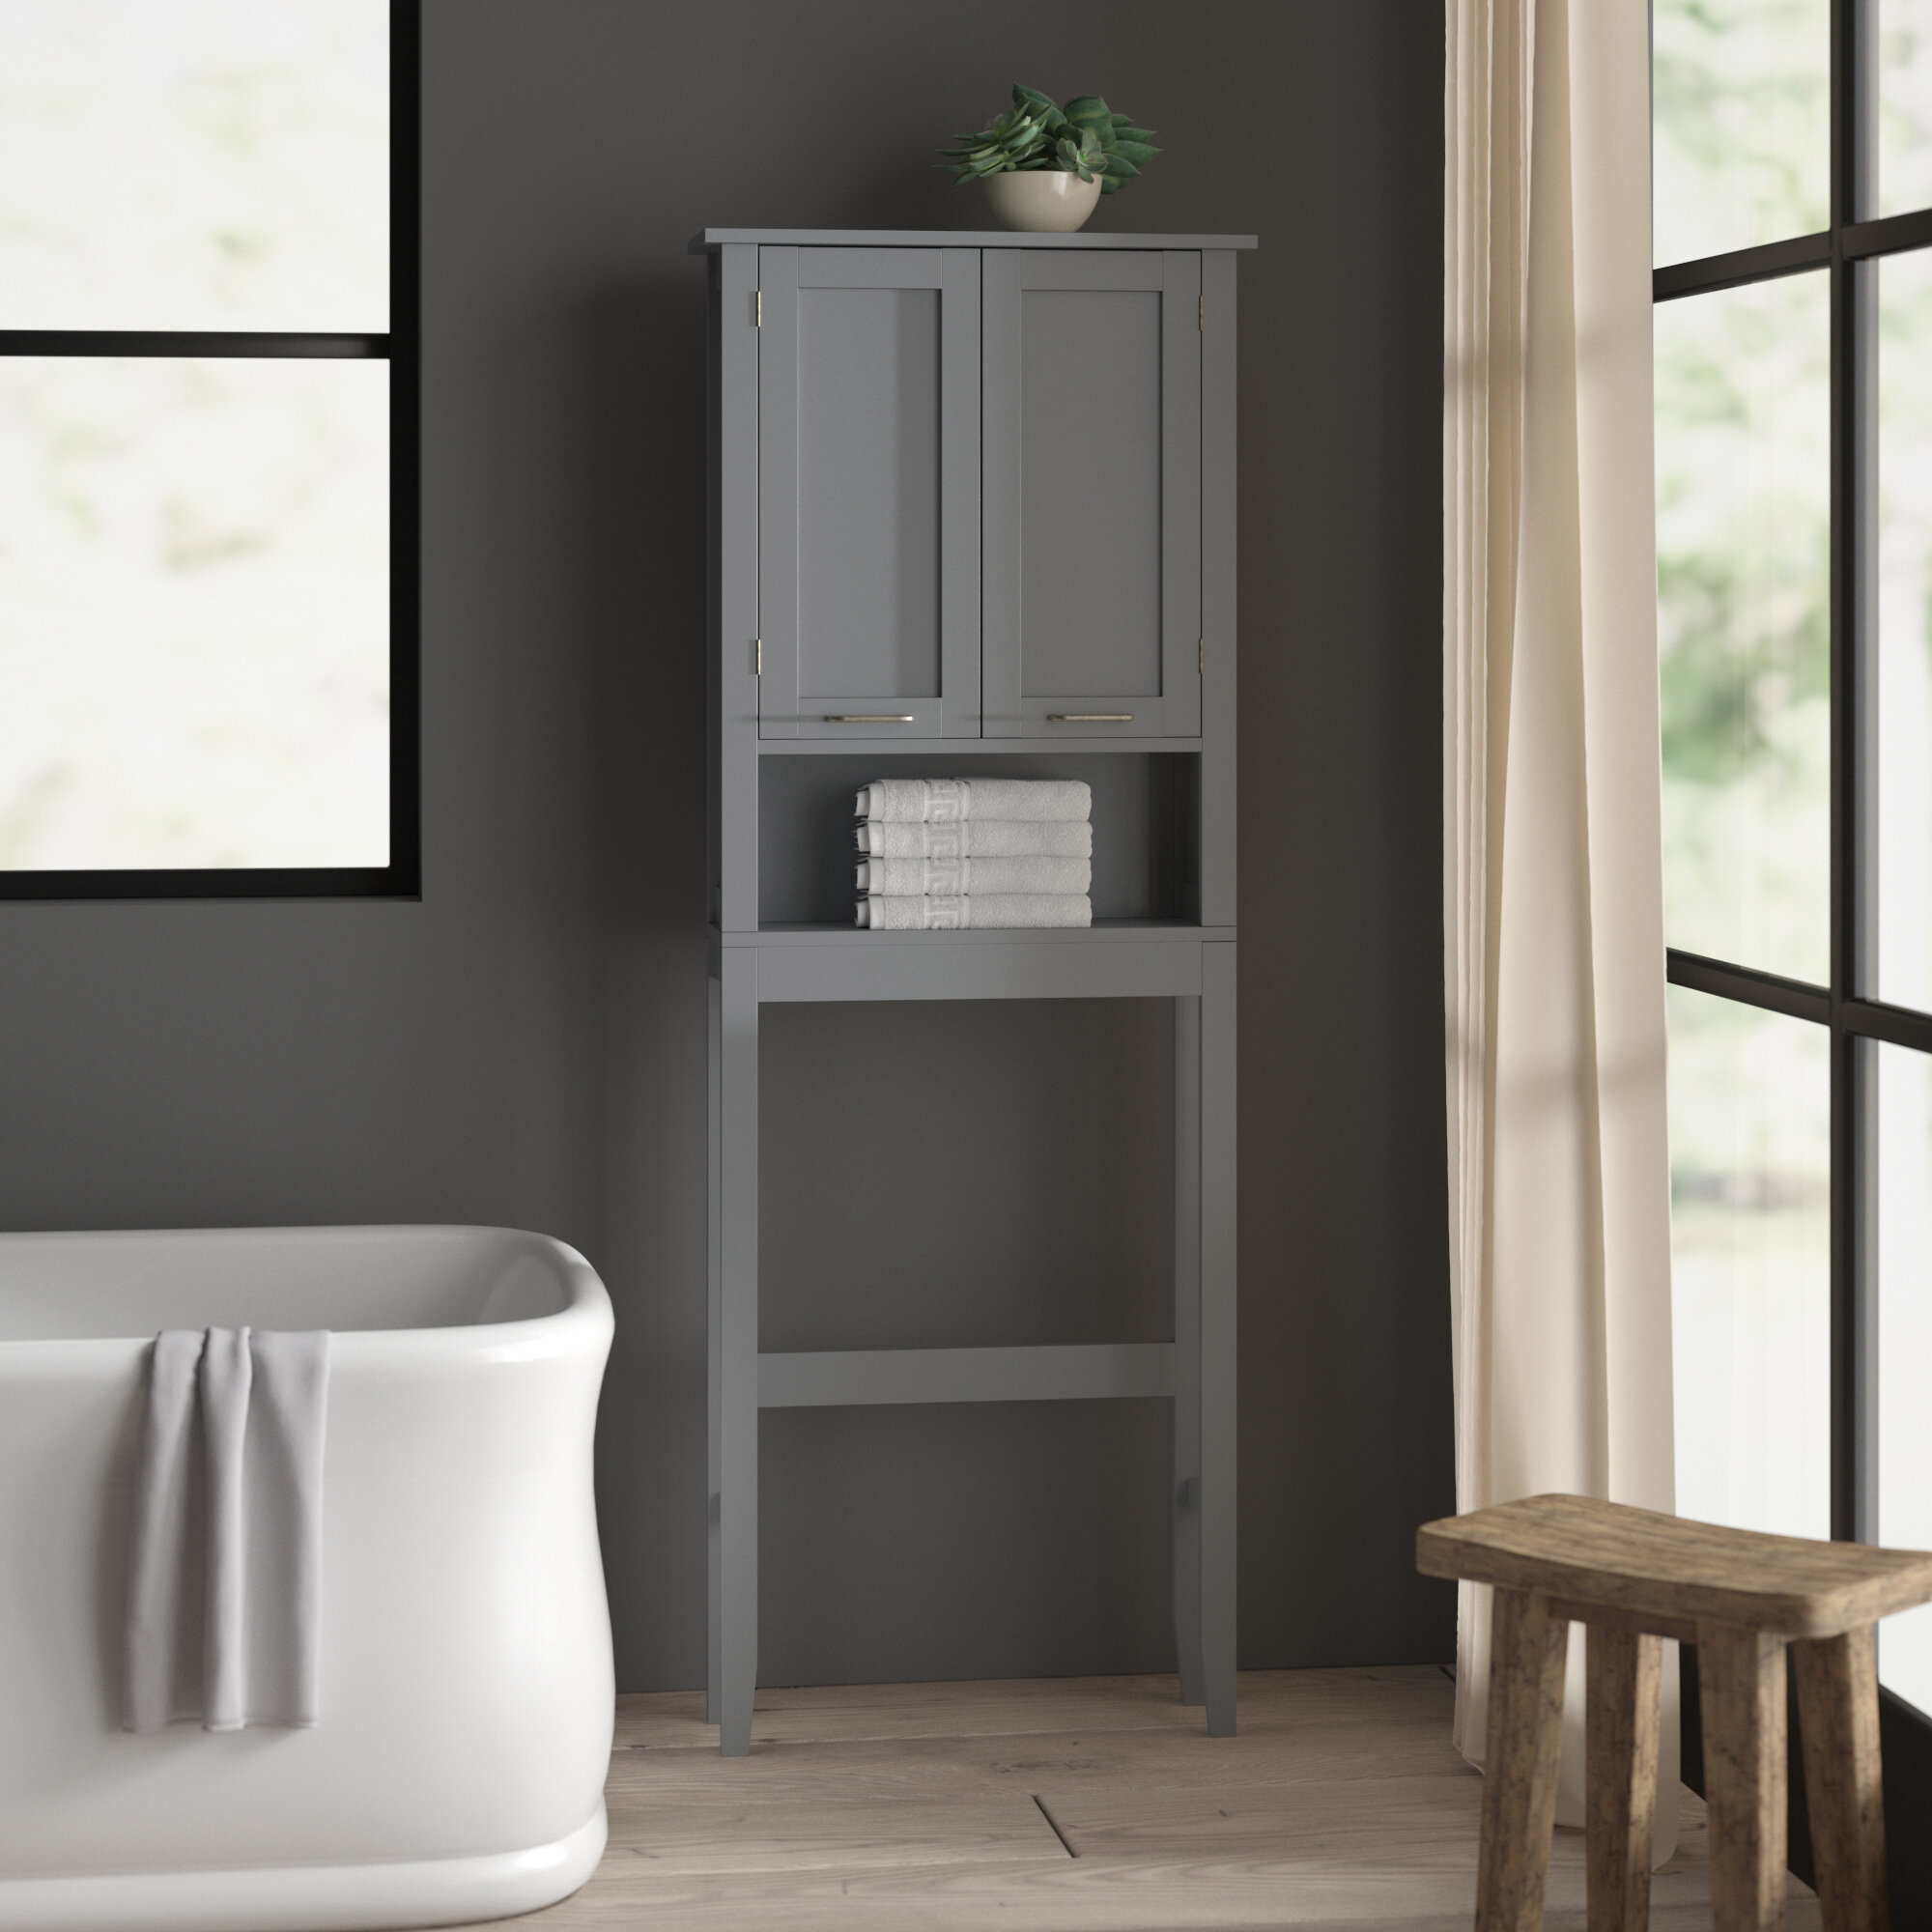 Beachcrest Home Donnell Solid Wood Freestanding Over-the-Toilet Storage &  Reviews